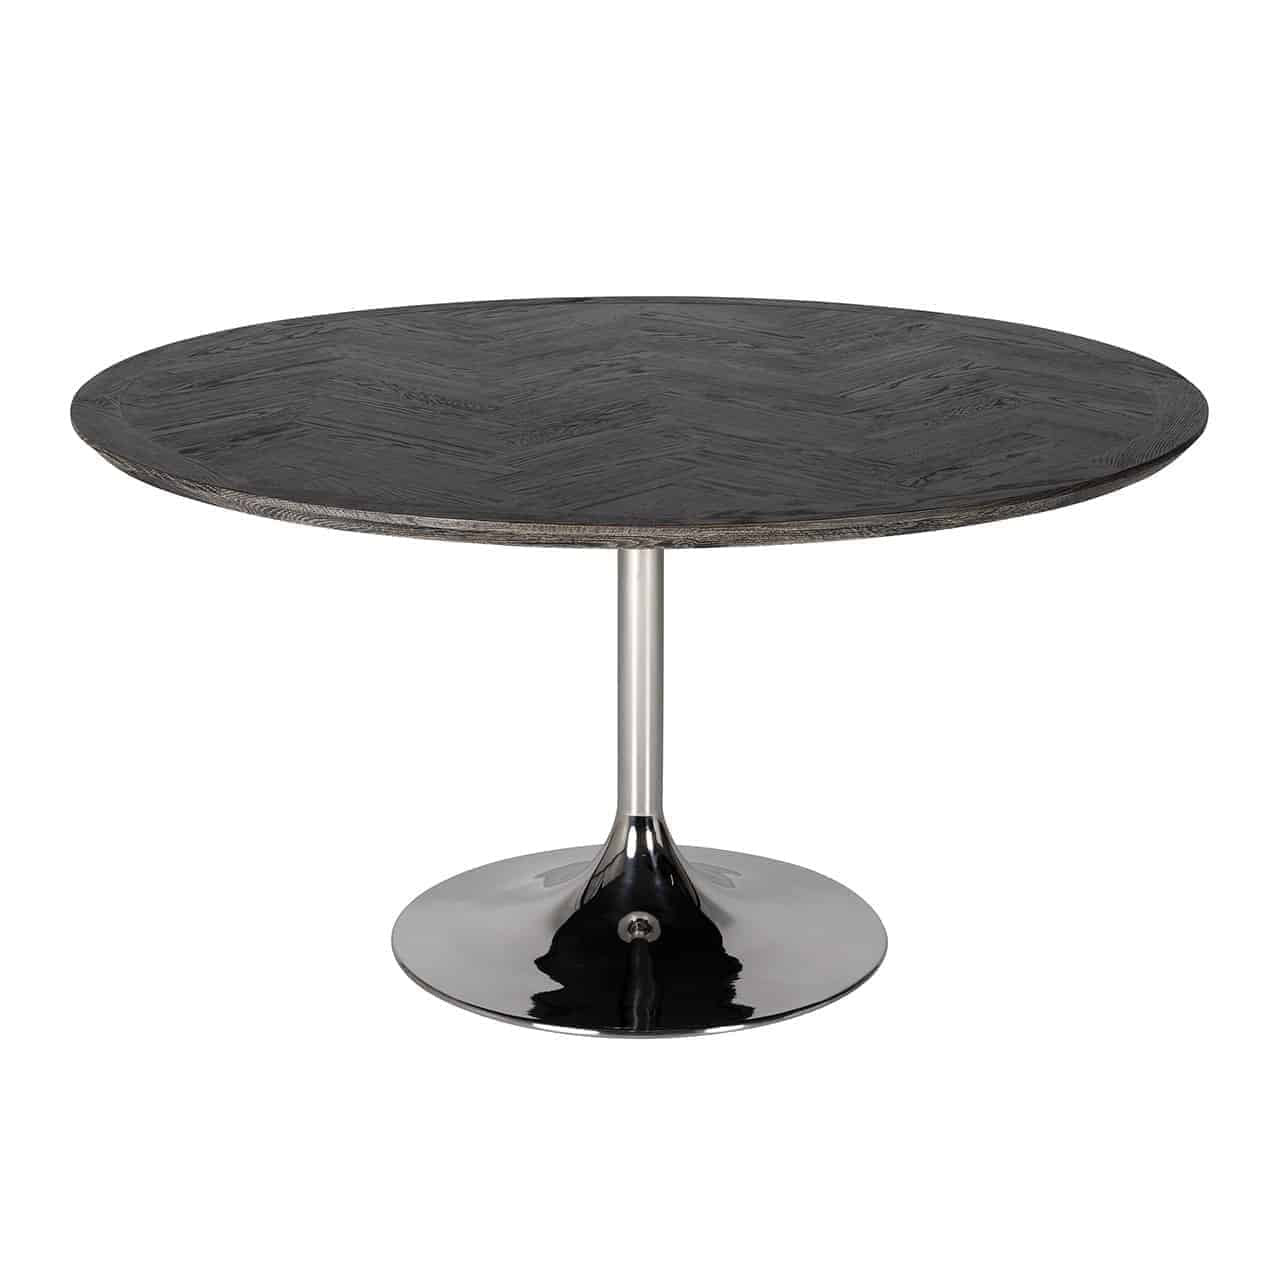 Arundel Silver Round Dining Table - Pavilion Interiors